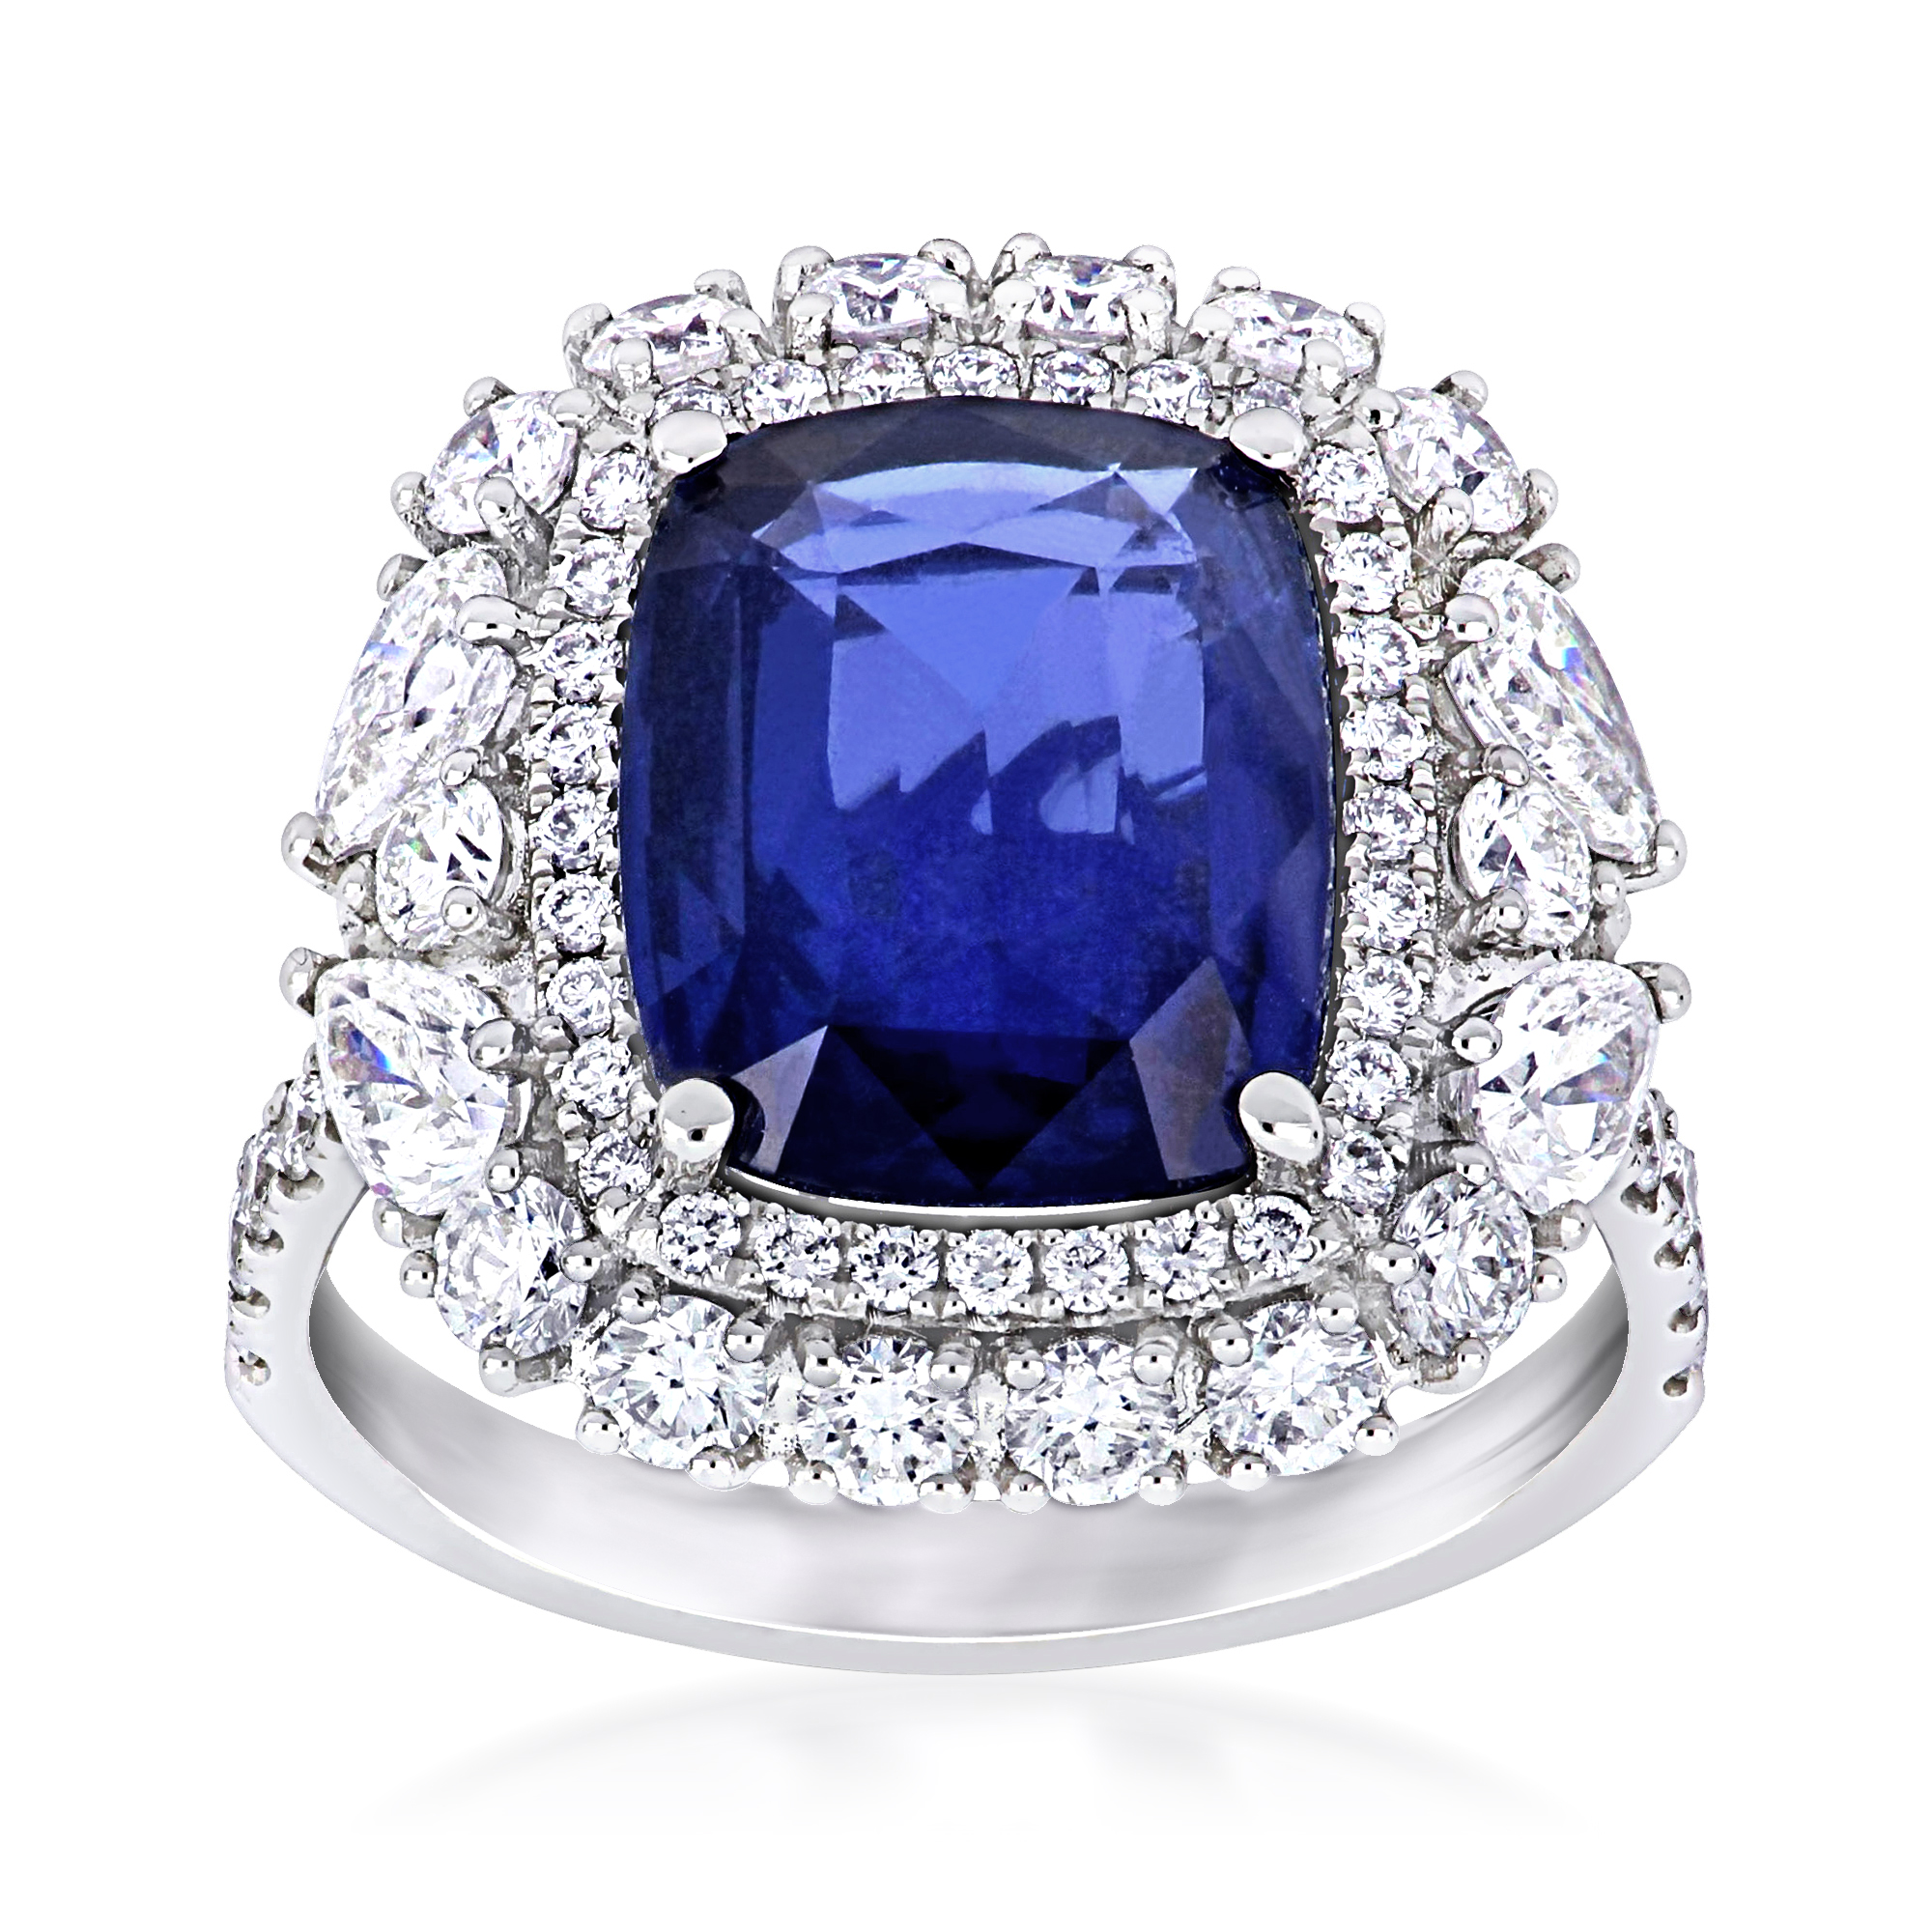 6.00 Carat Sapphire Ring with 1.30 ct. t.w. Diamonds in 14kt White Gold |  Ross-Simons